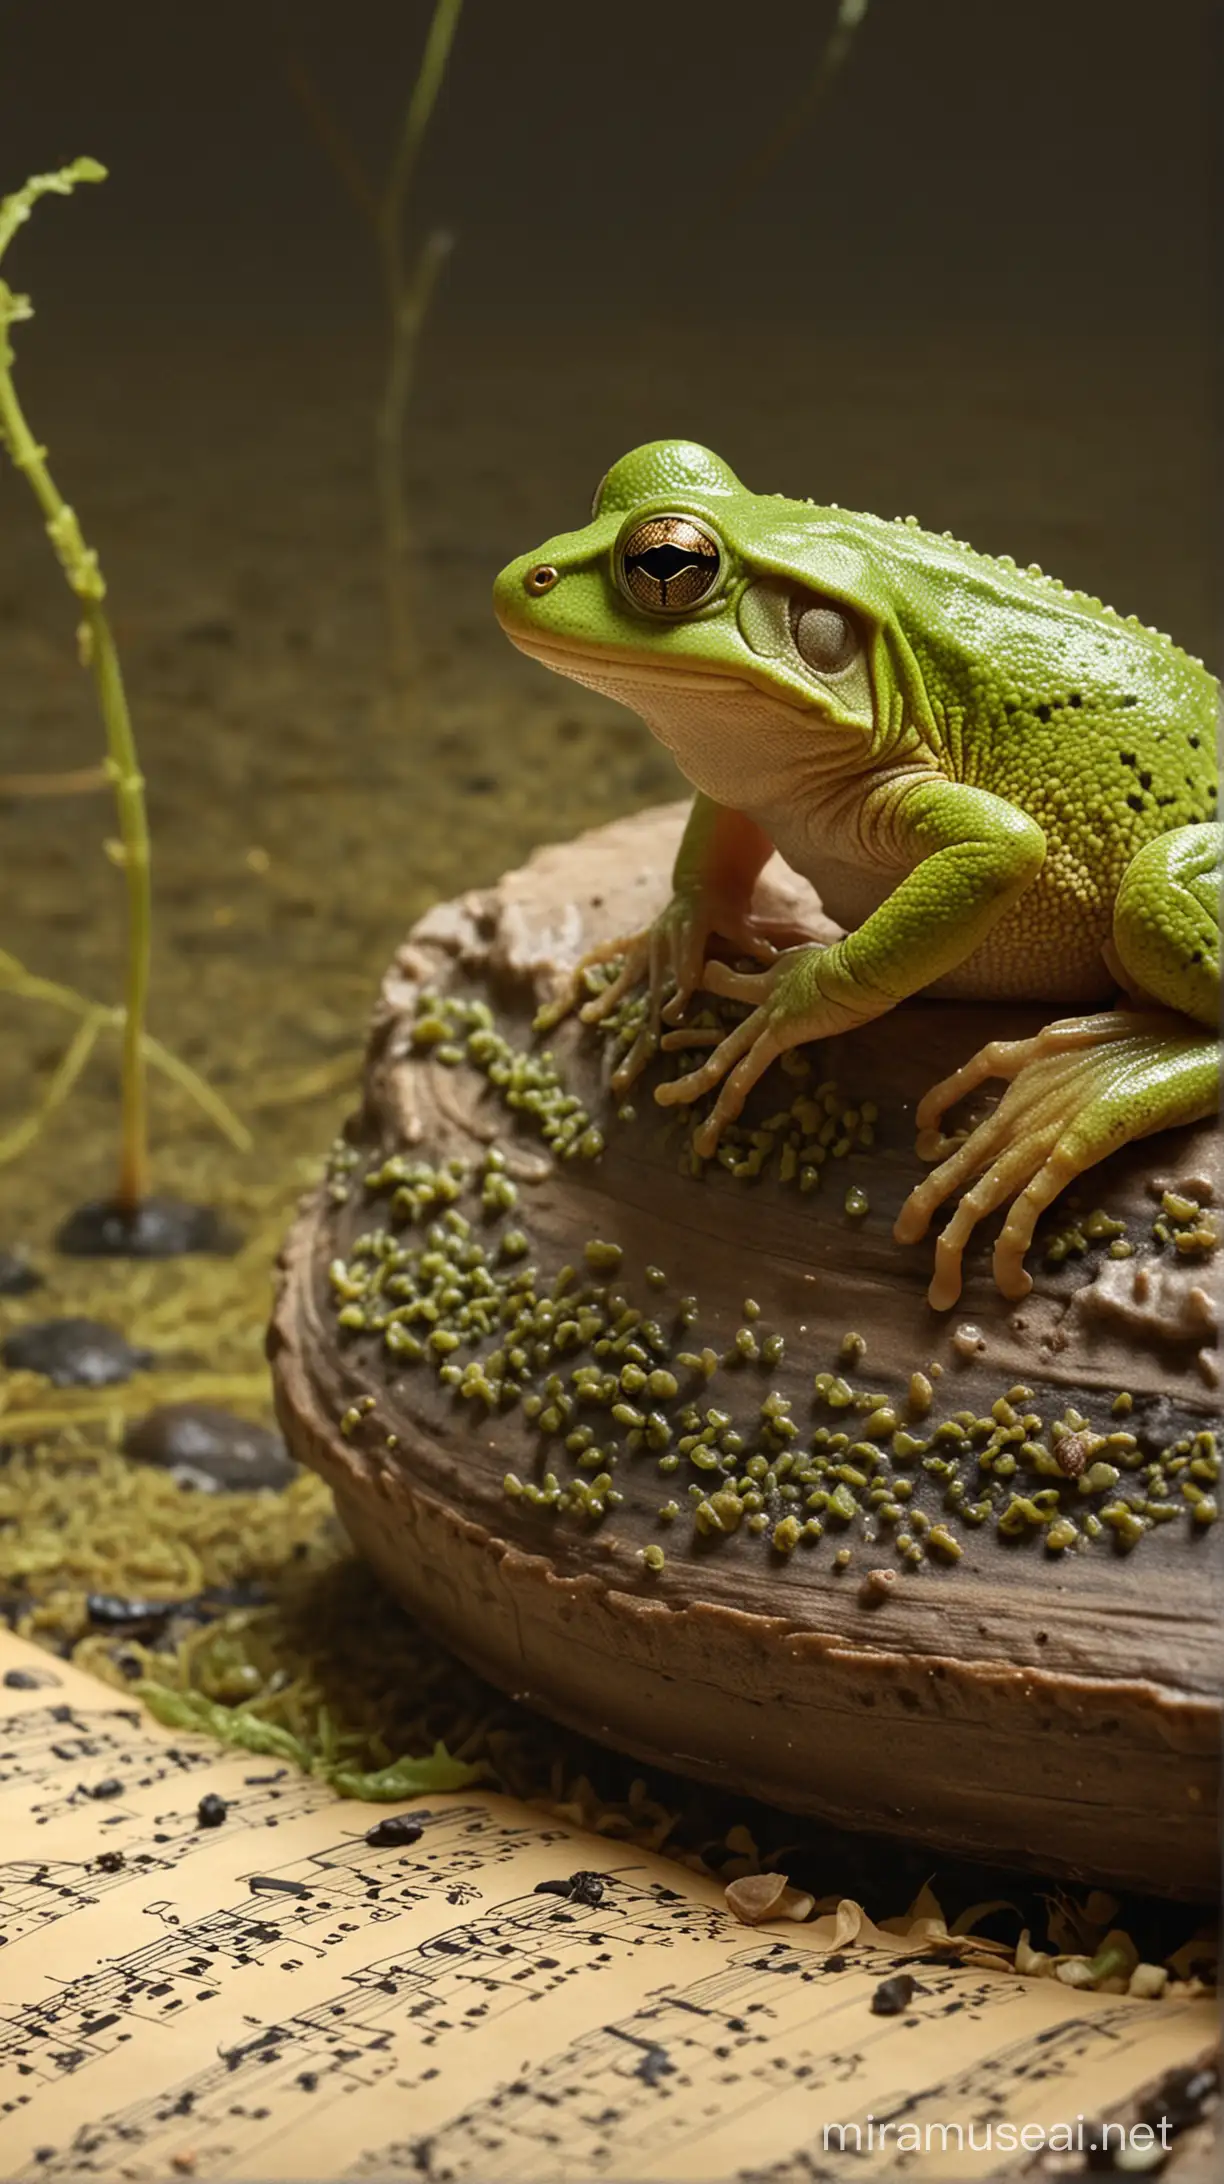 Young Amphibian Delighting in Classical Music